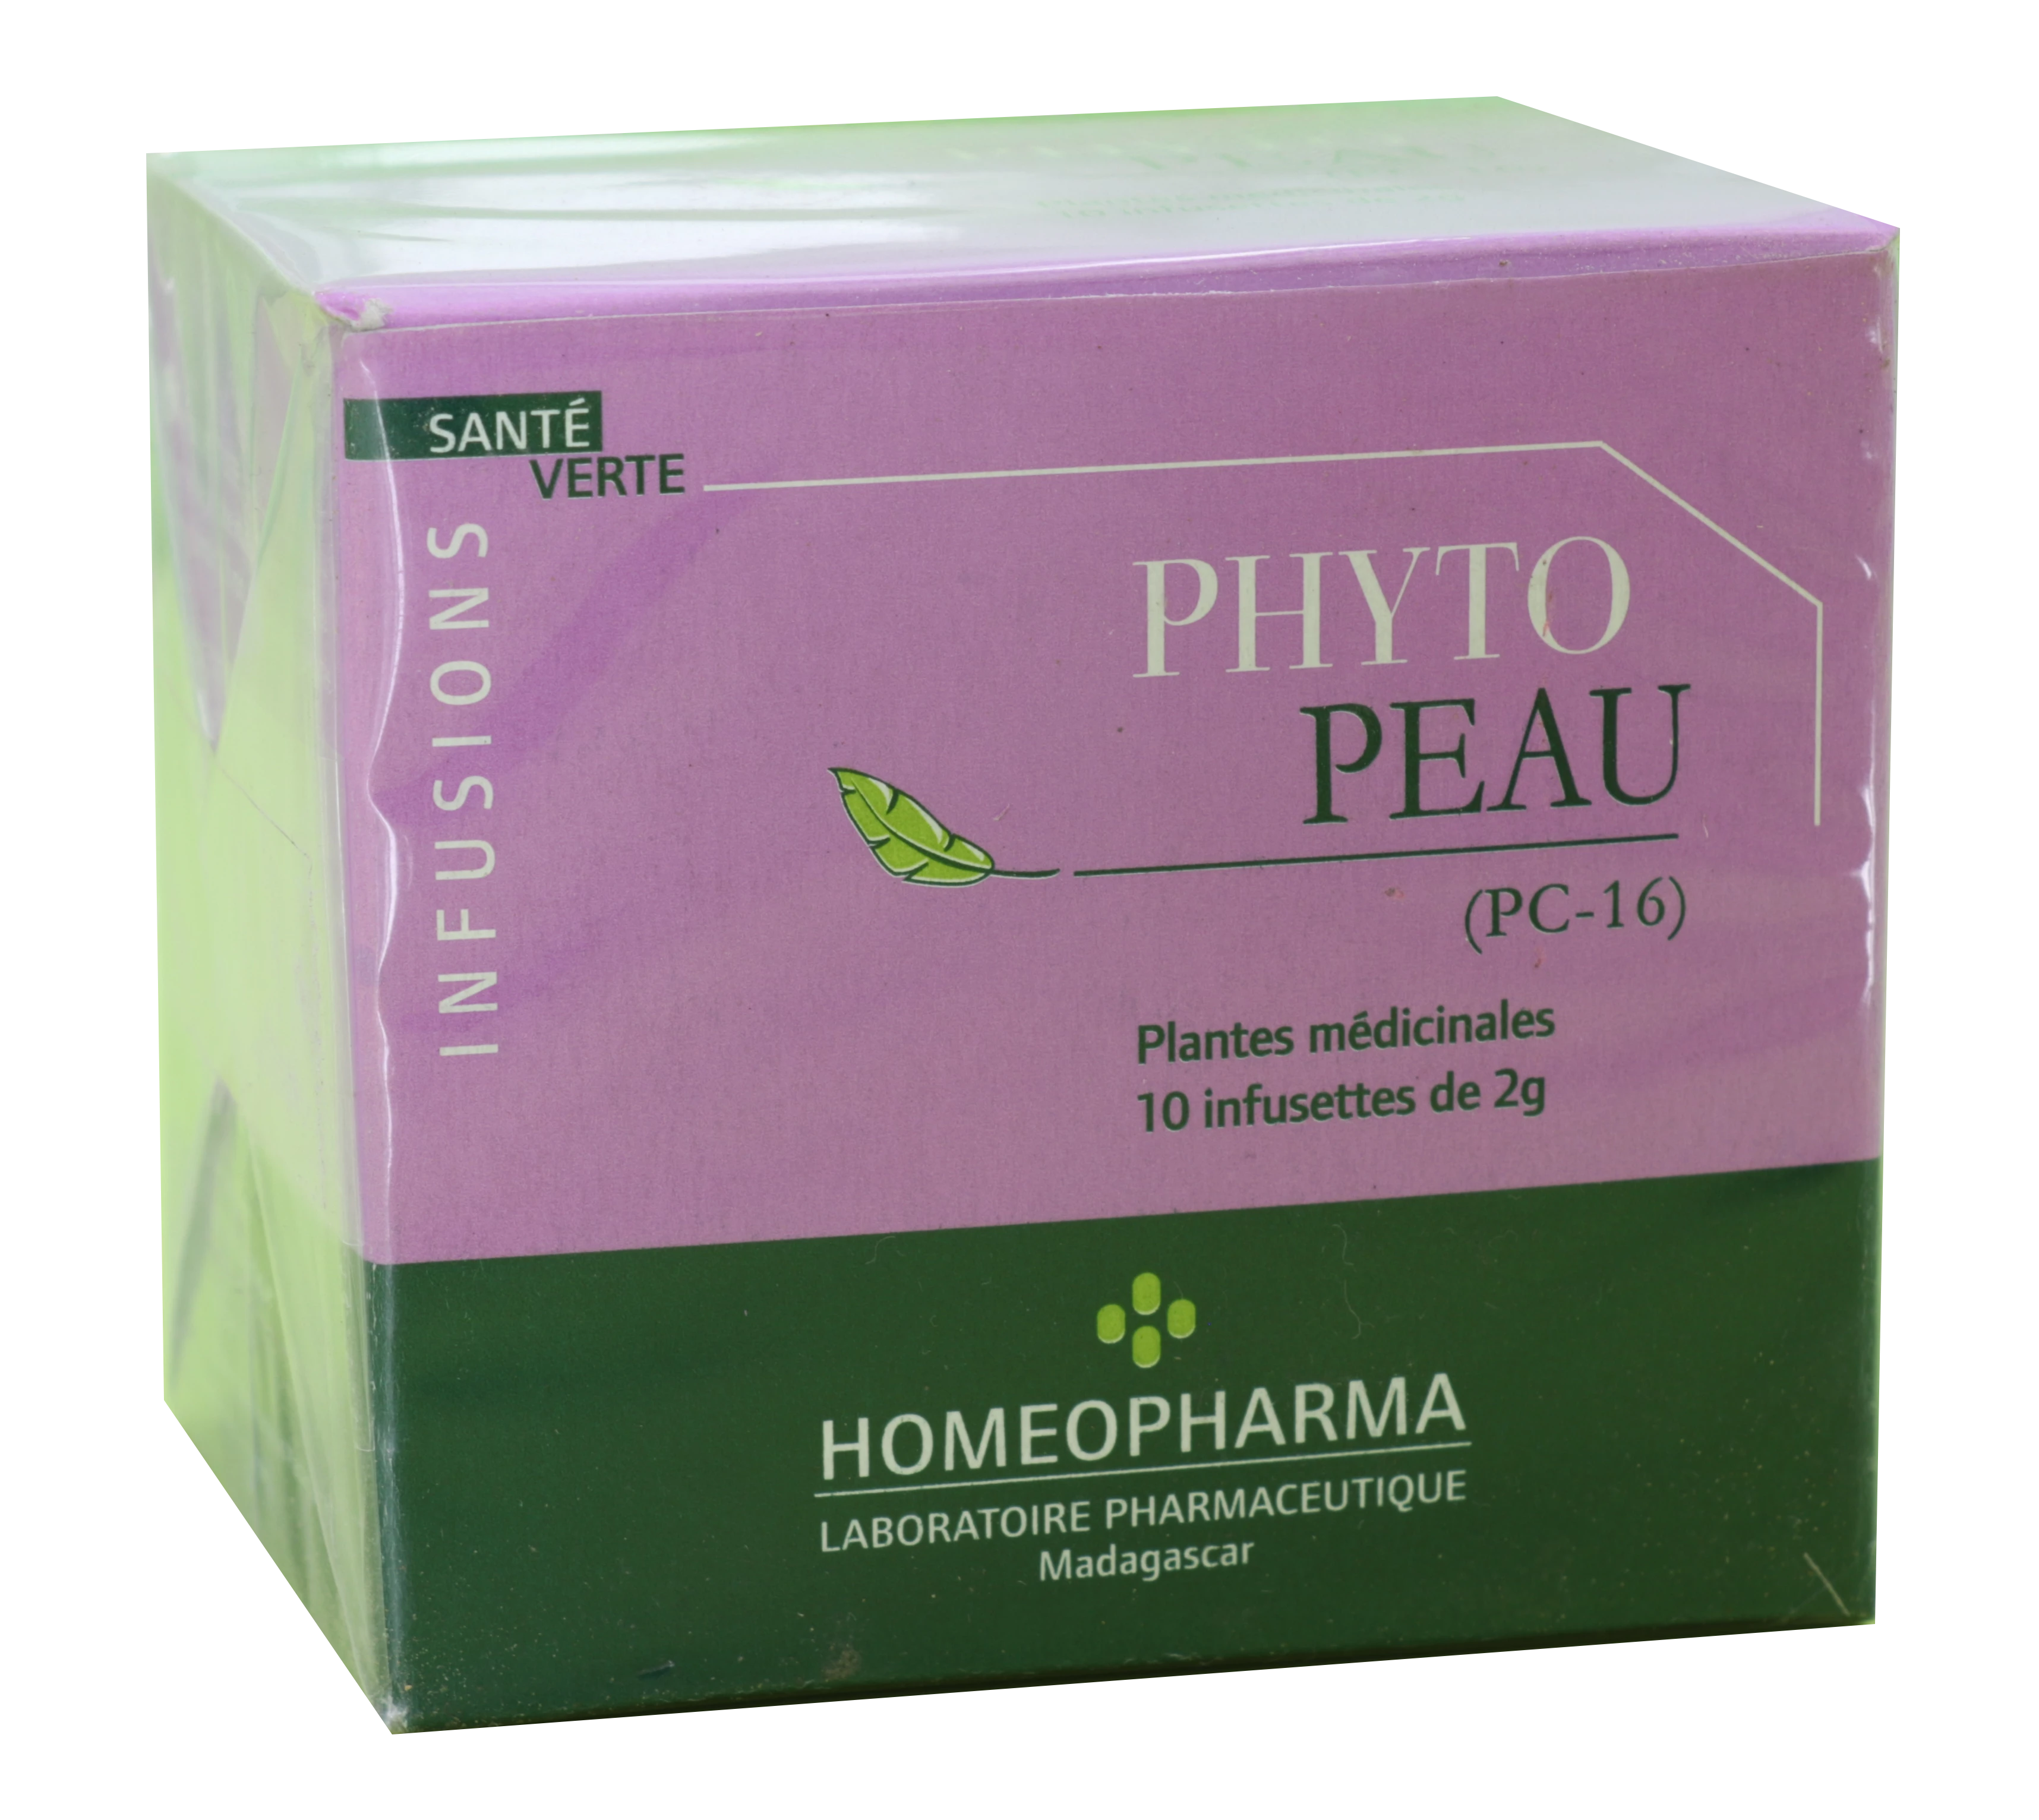 Phytotherapie Traditionnelle  Pc16-phyto-peau Bte / 20 Infusettes - Homeopharma